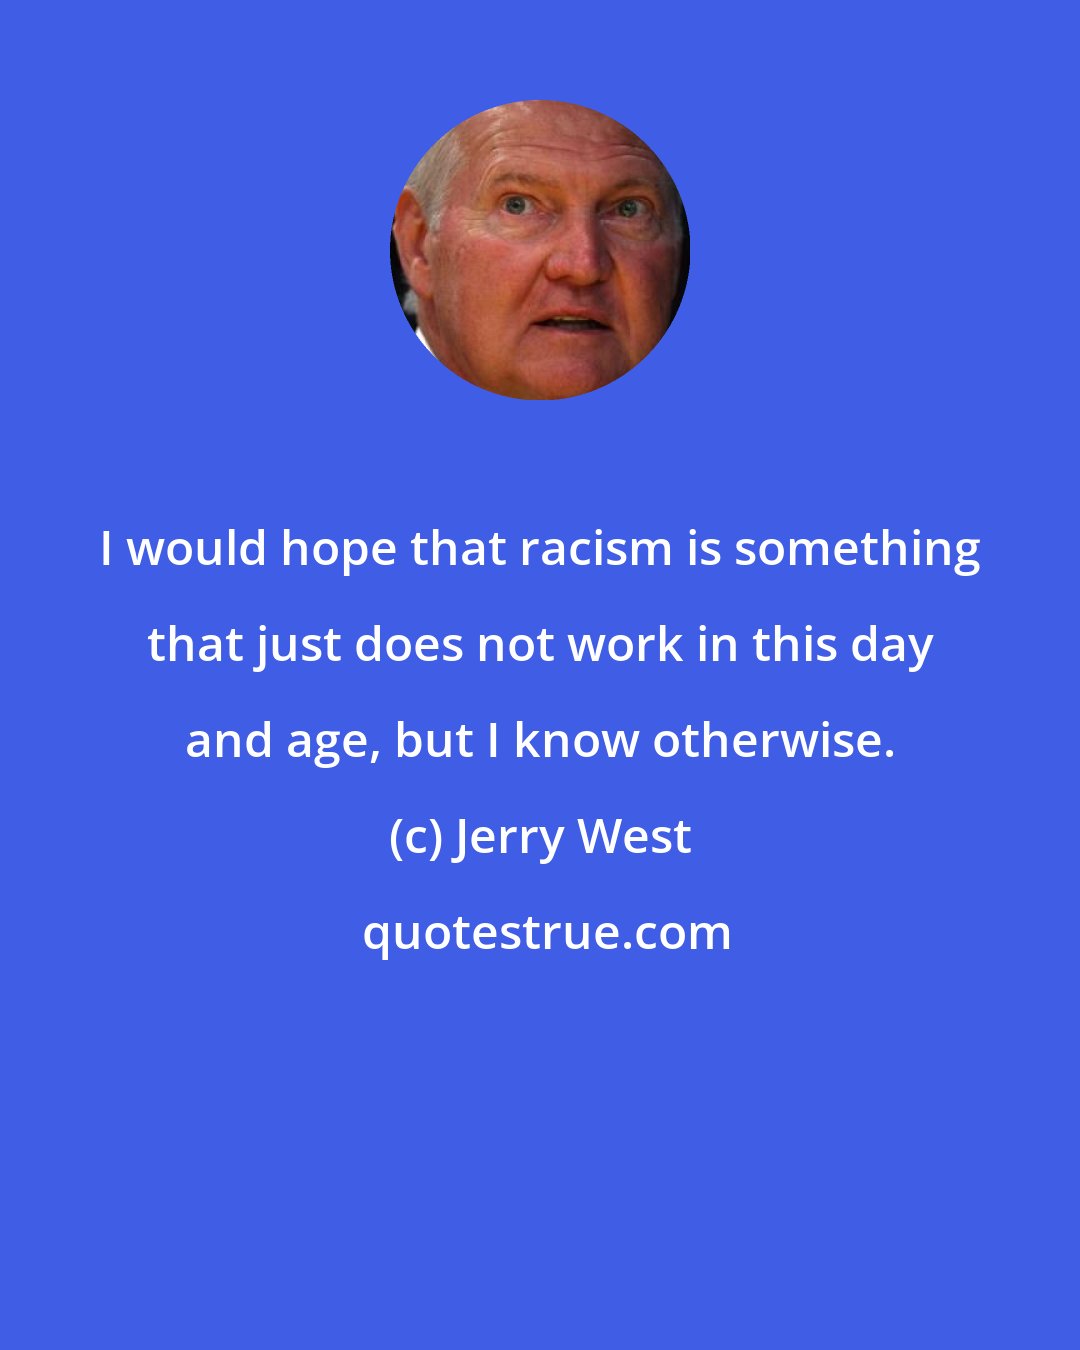 Jerry West: I would hope that racism is something that just does not work in this day and age, but I know otherwise.